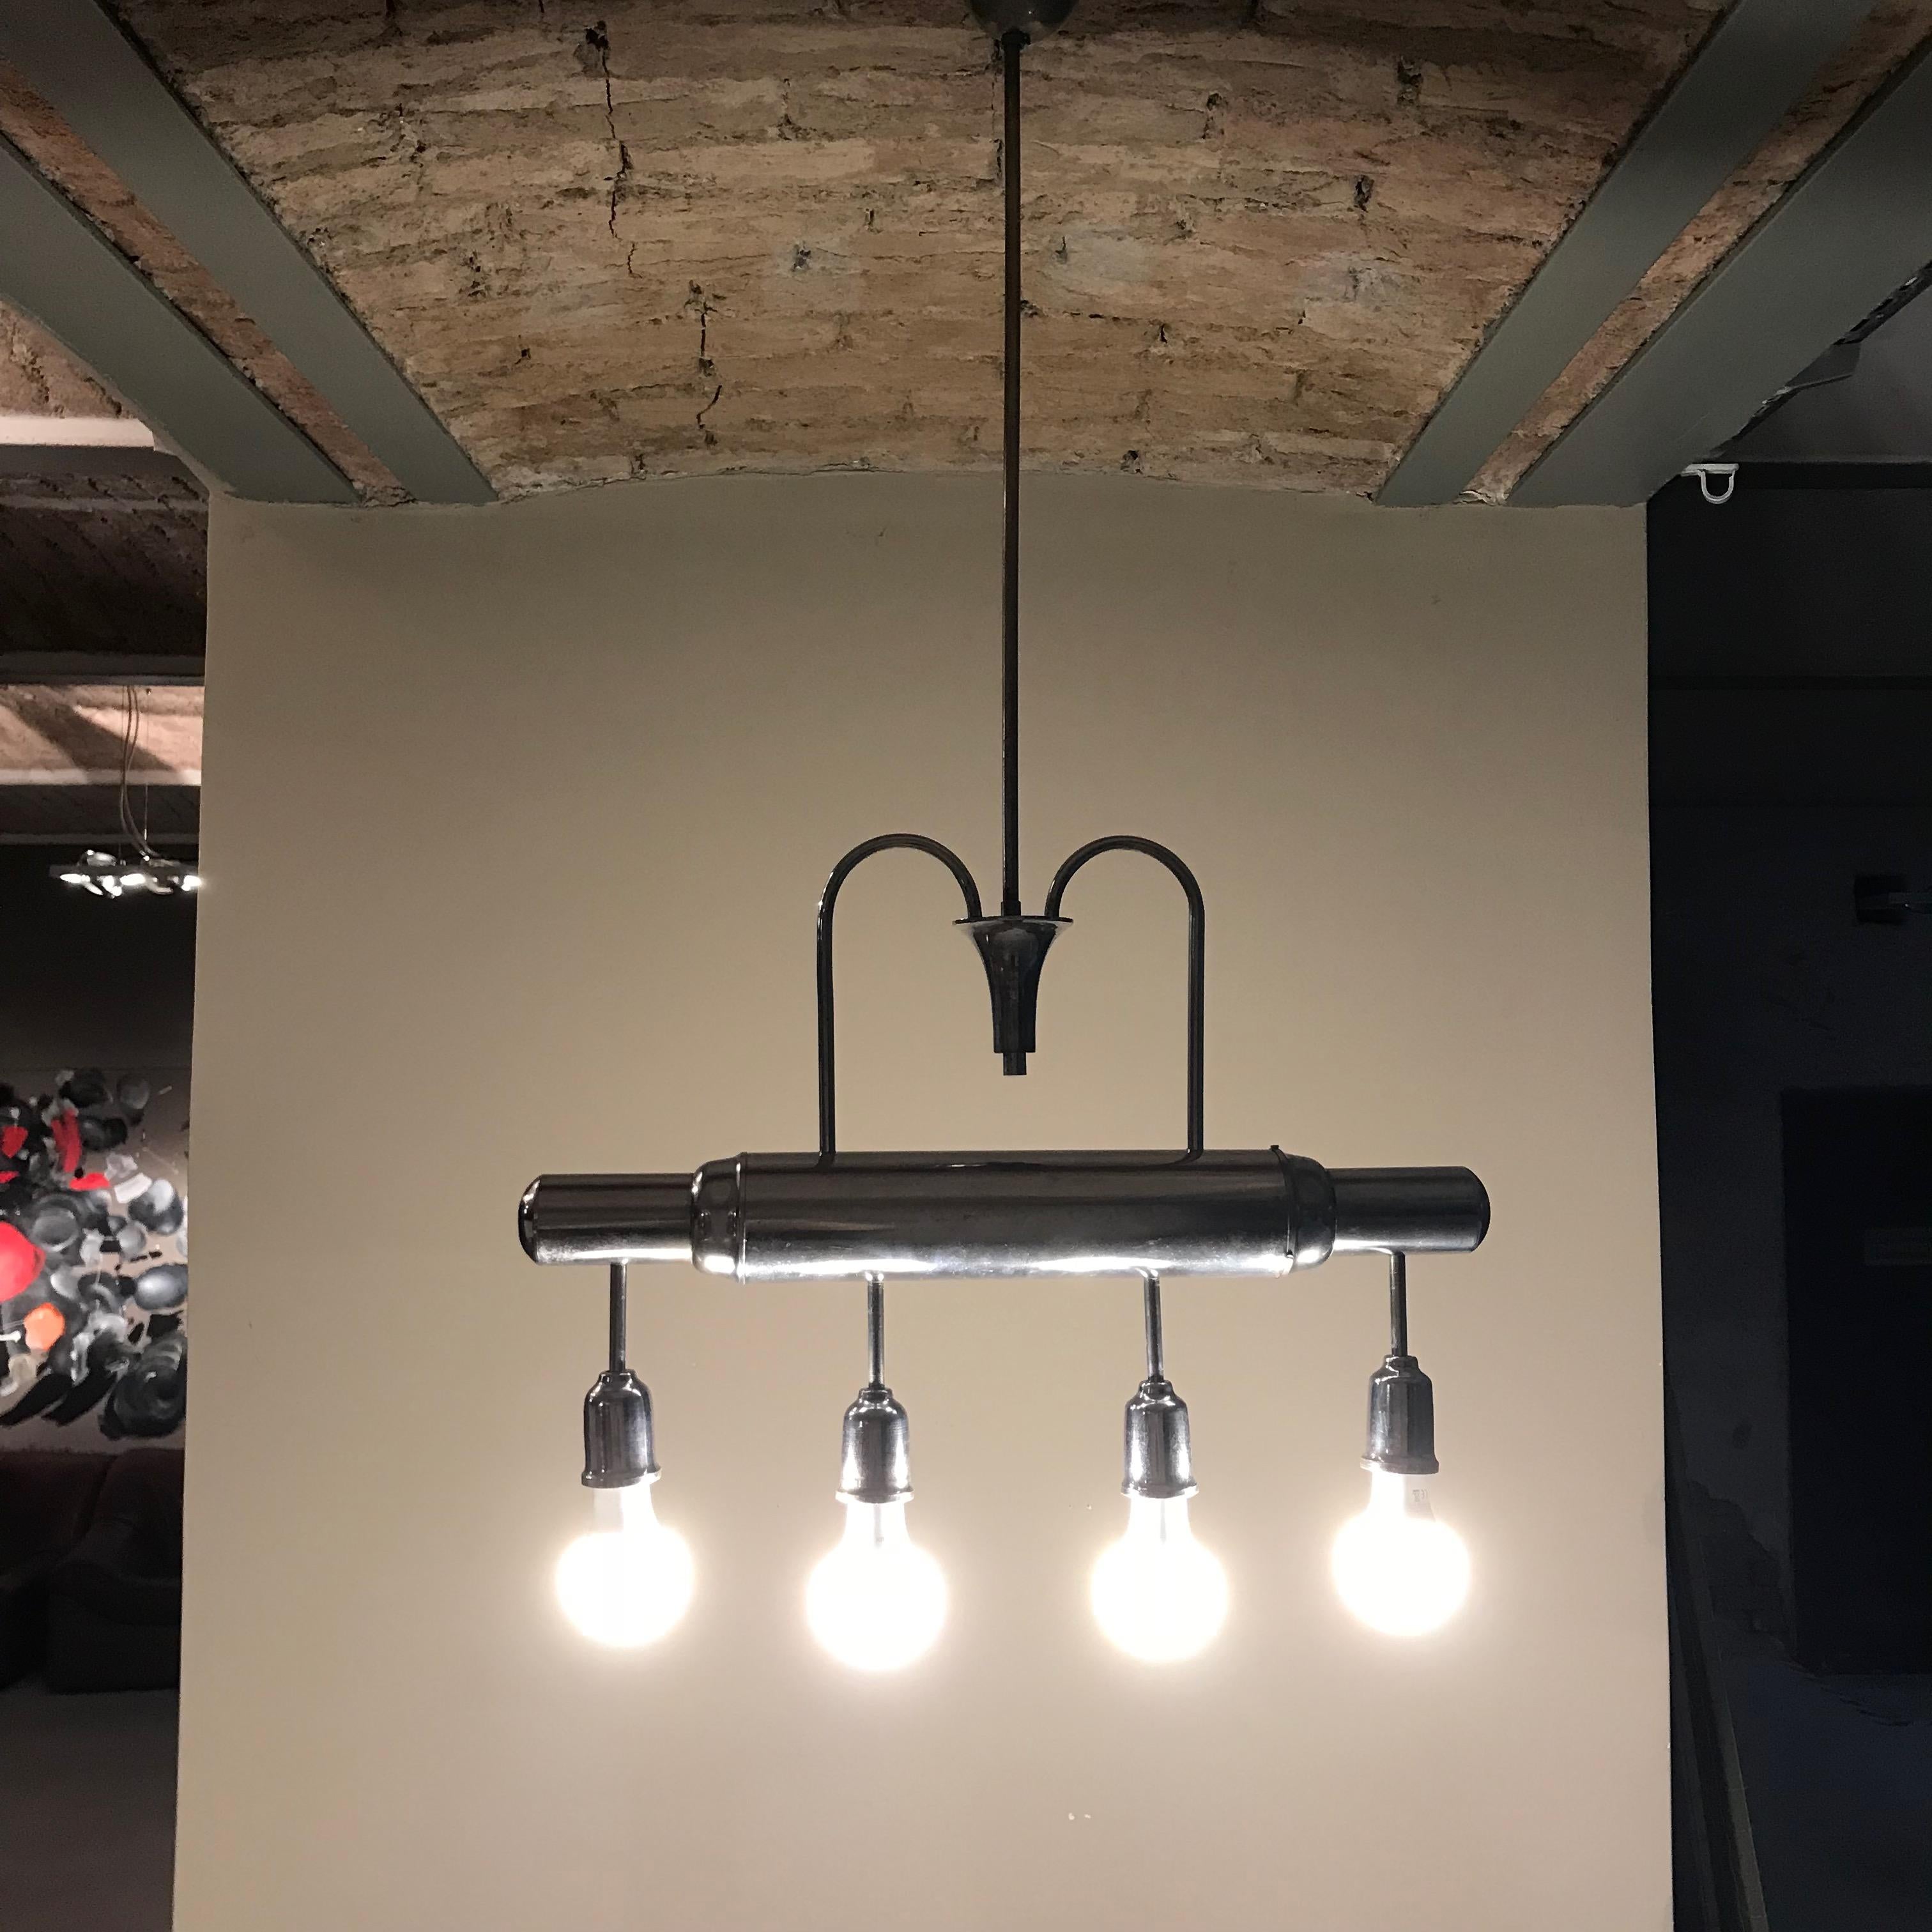 Art Deco pendant lamp handmade in the 1930s. The lamp is made in form of the streamlined locomotive of the time.
Newly rewired, fully working and tested condition - four porcelain Edison E27 sockets. The light works on 110V - 240V.
Very good